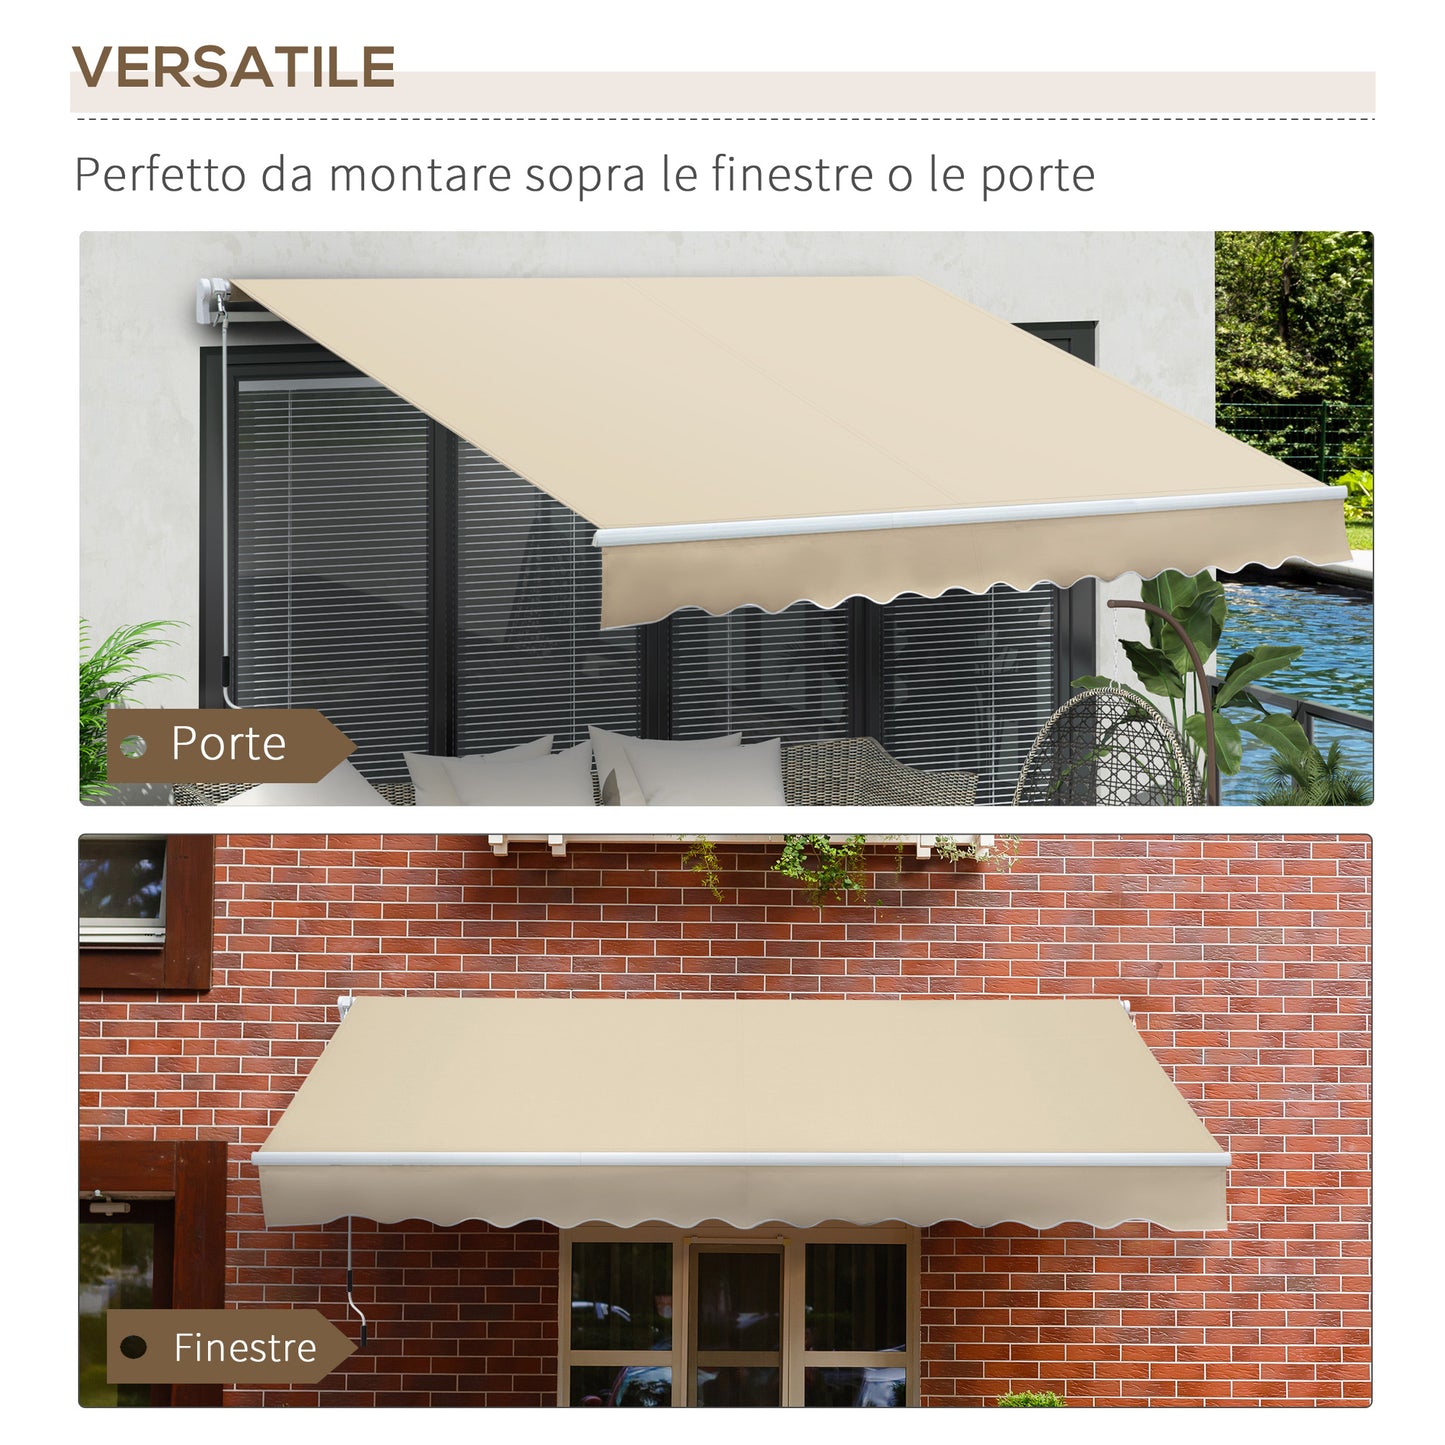 Outdoor Awning with Roller Arms and Crank Opening, 360x250 cm, Cream